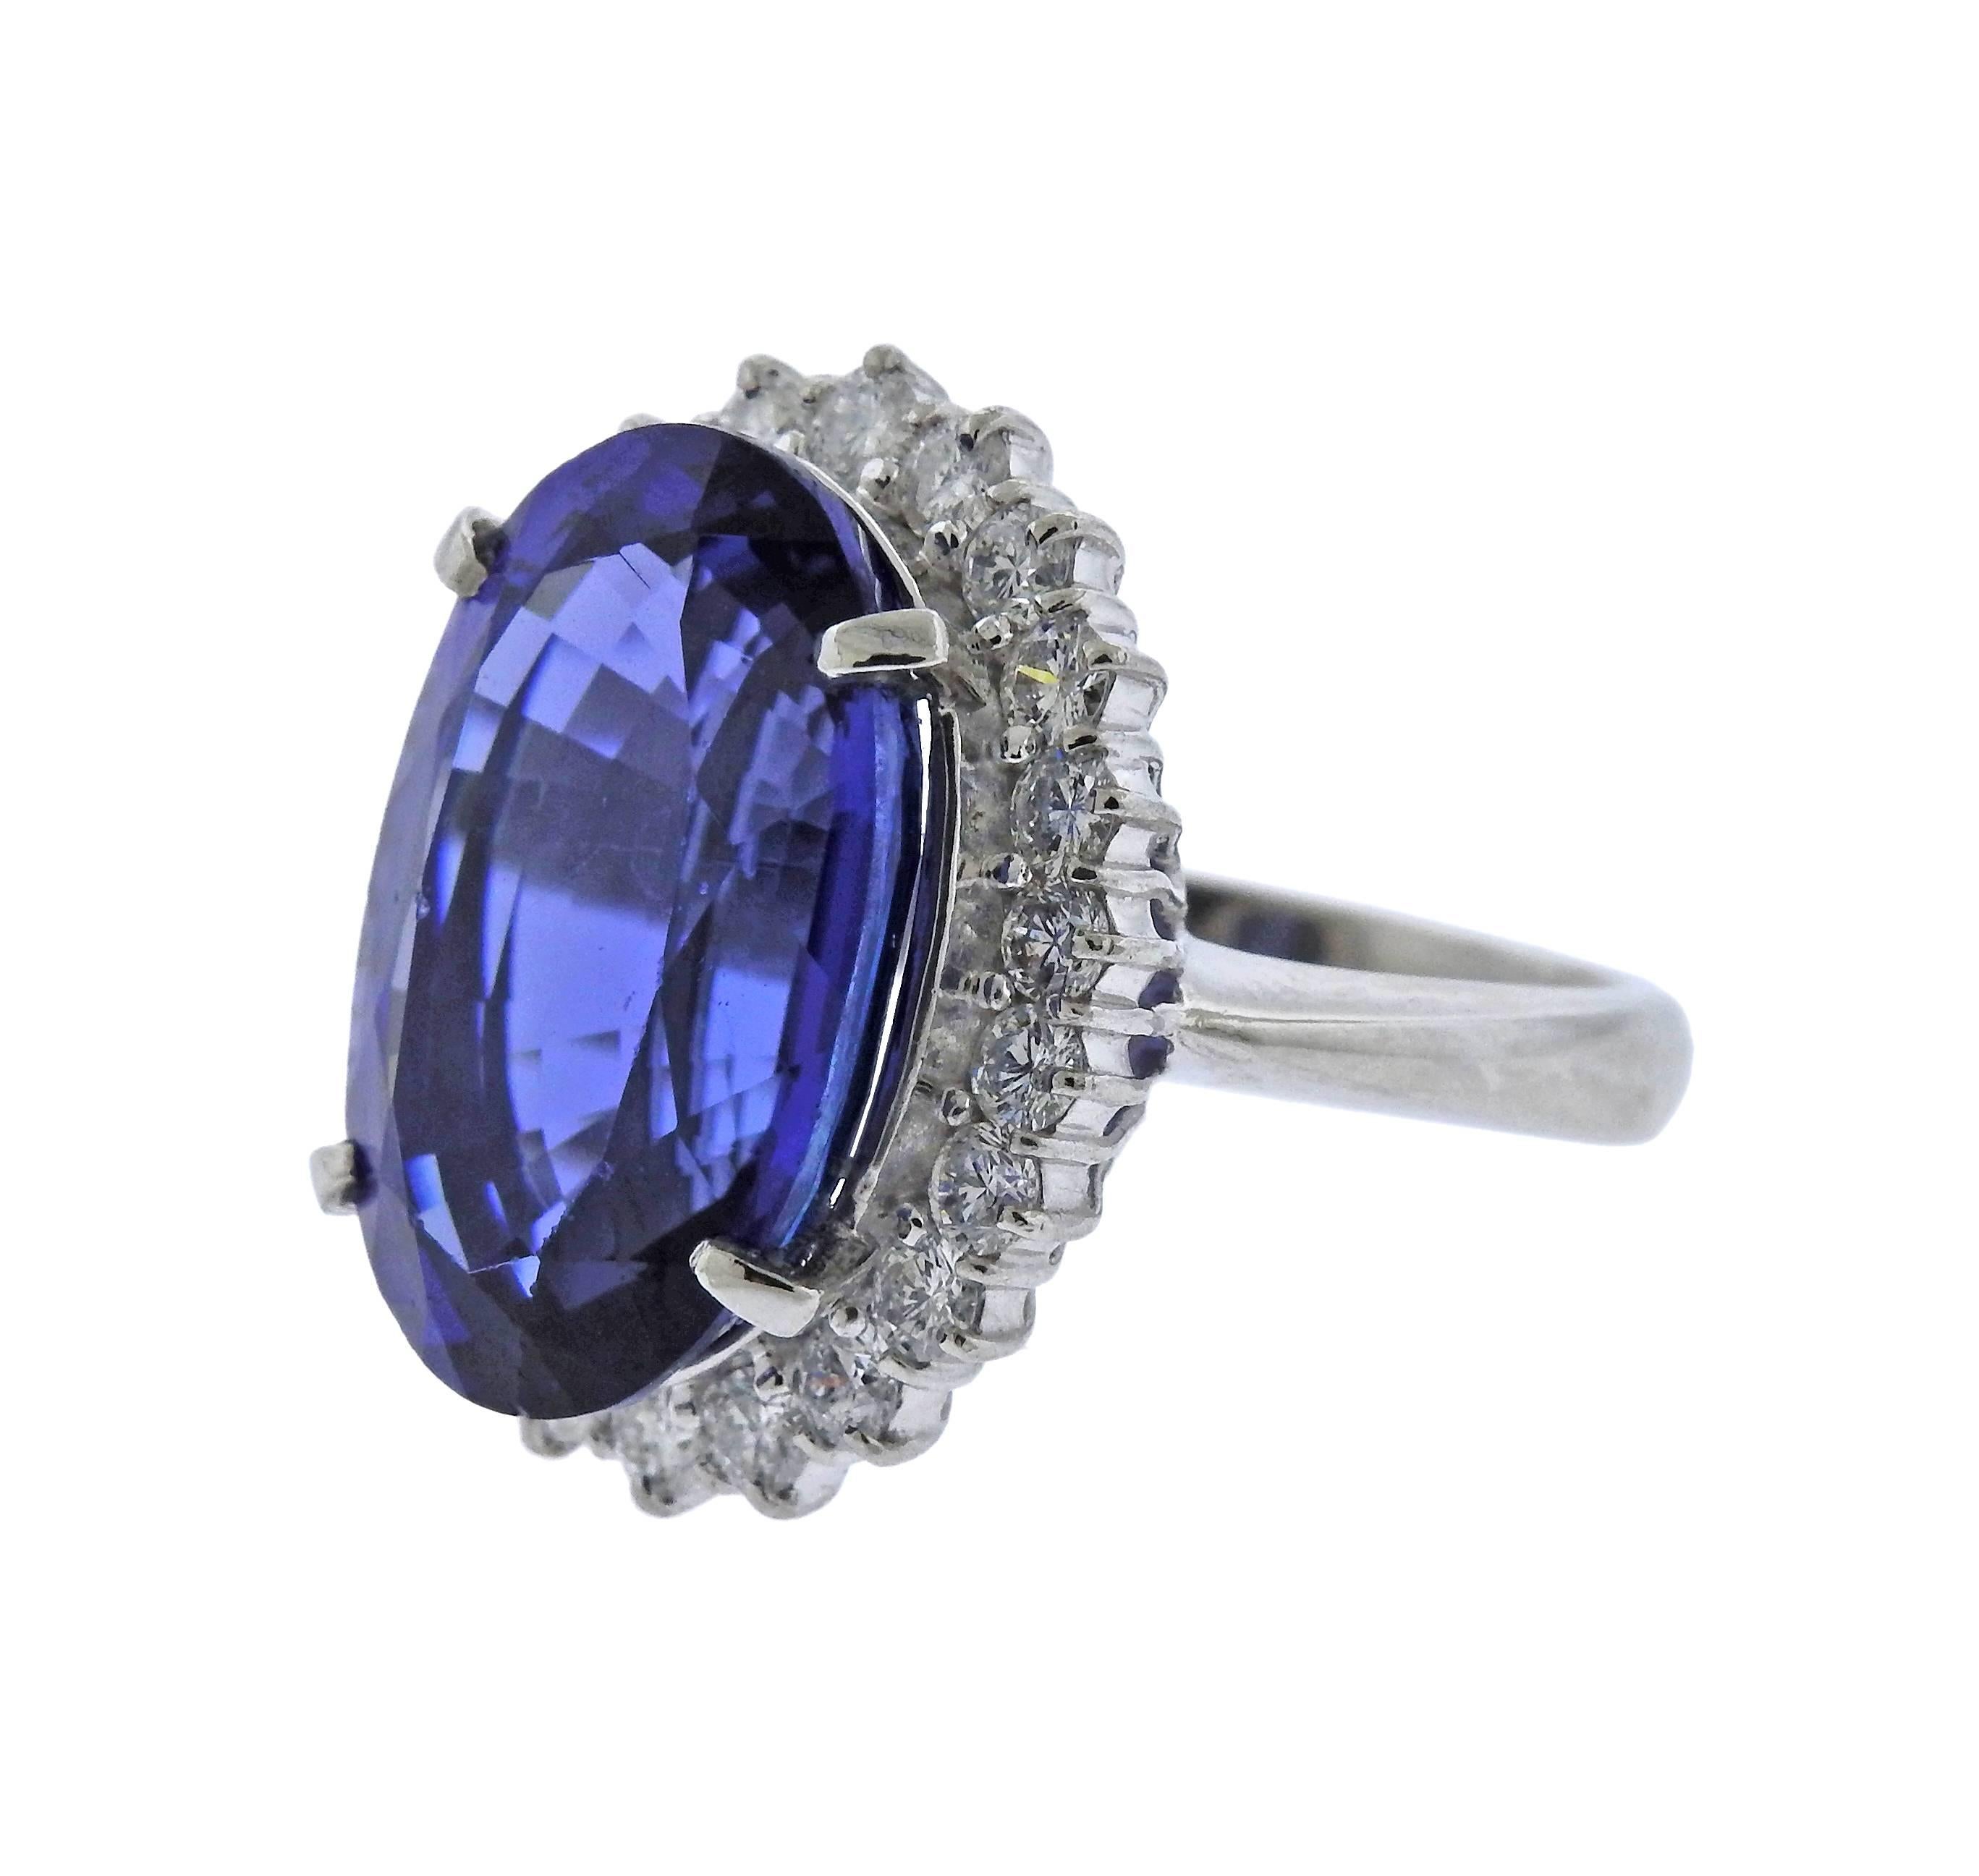 Impressive 19.69ct oval tanzanite gemstone, adorned with 1.63ctw in diamonds around, in platinum ring setting. Ring size - 8 1/4, ring top is 24mm x 20mm, weighs 18.9 grams. Marked: 19.69, D1.63, Pt900.